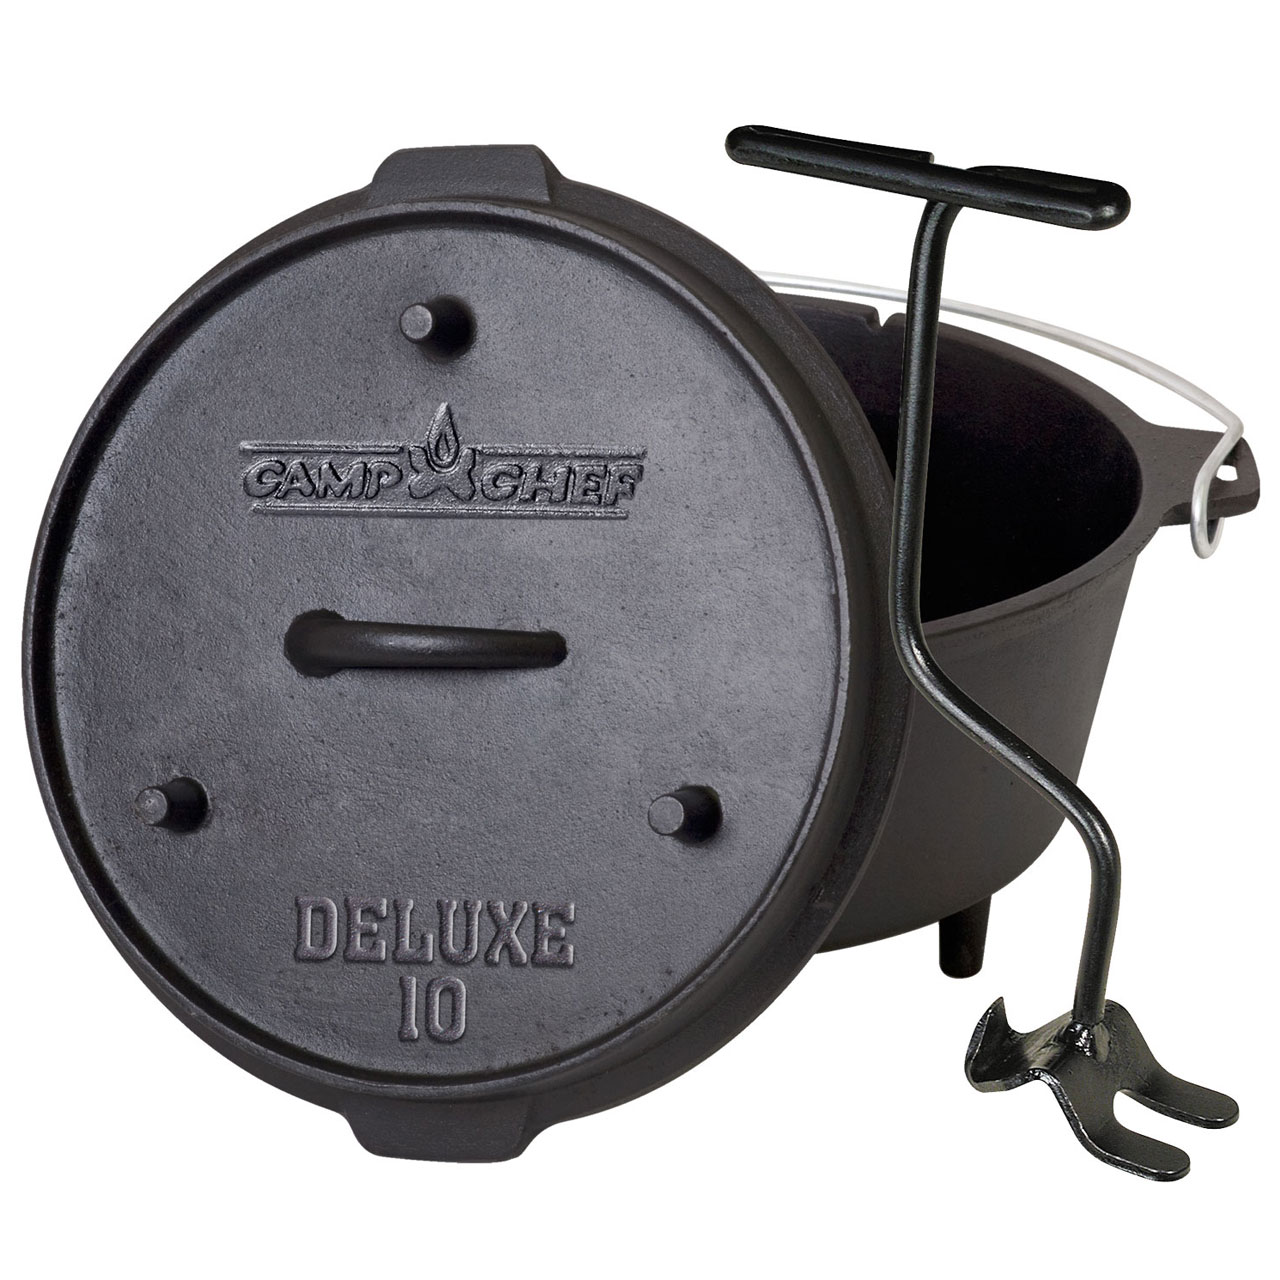 Camp Chef 10'' Deluxe Dutch Oven